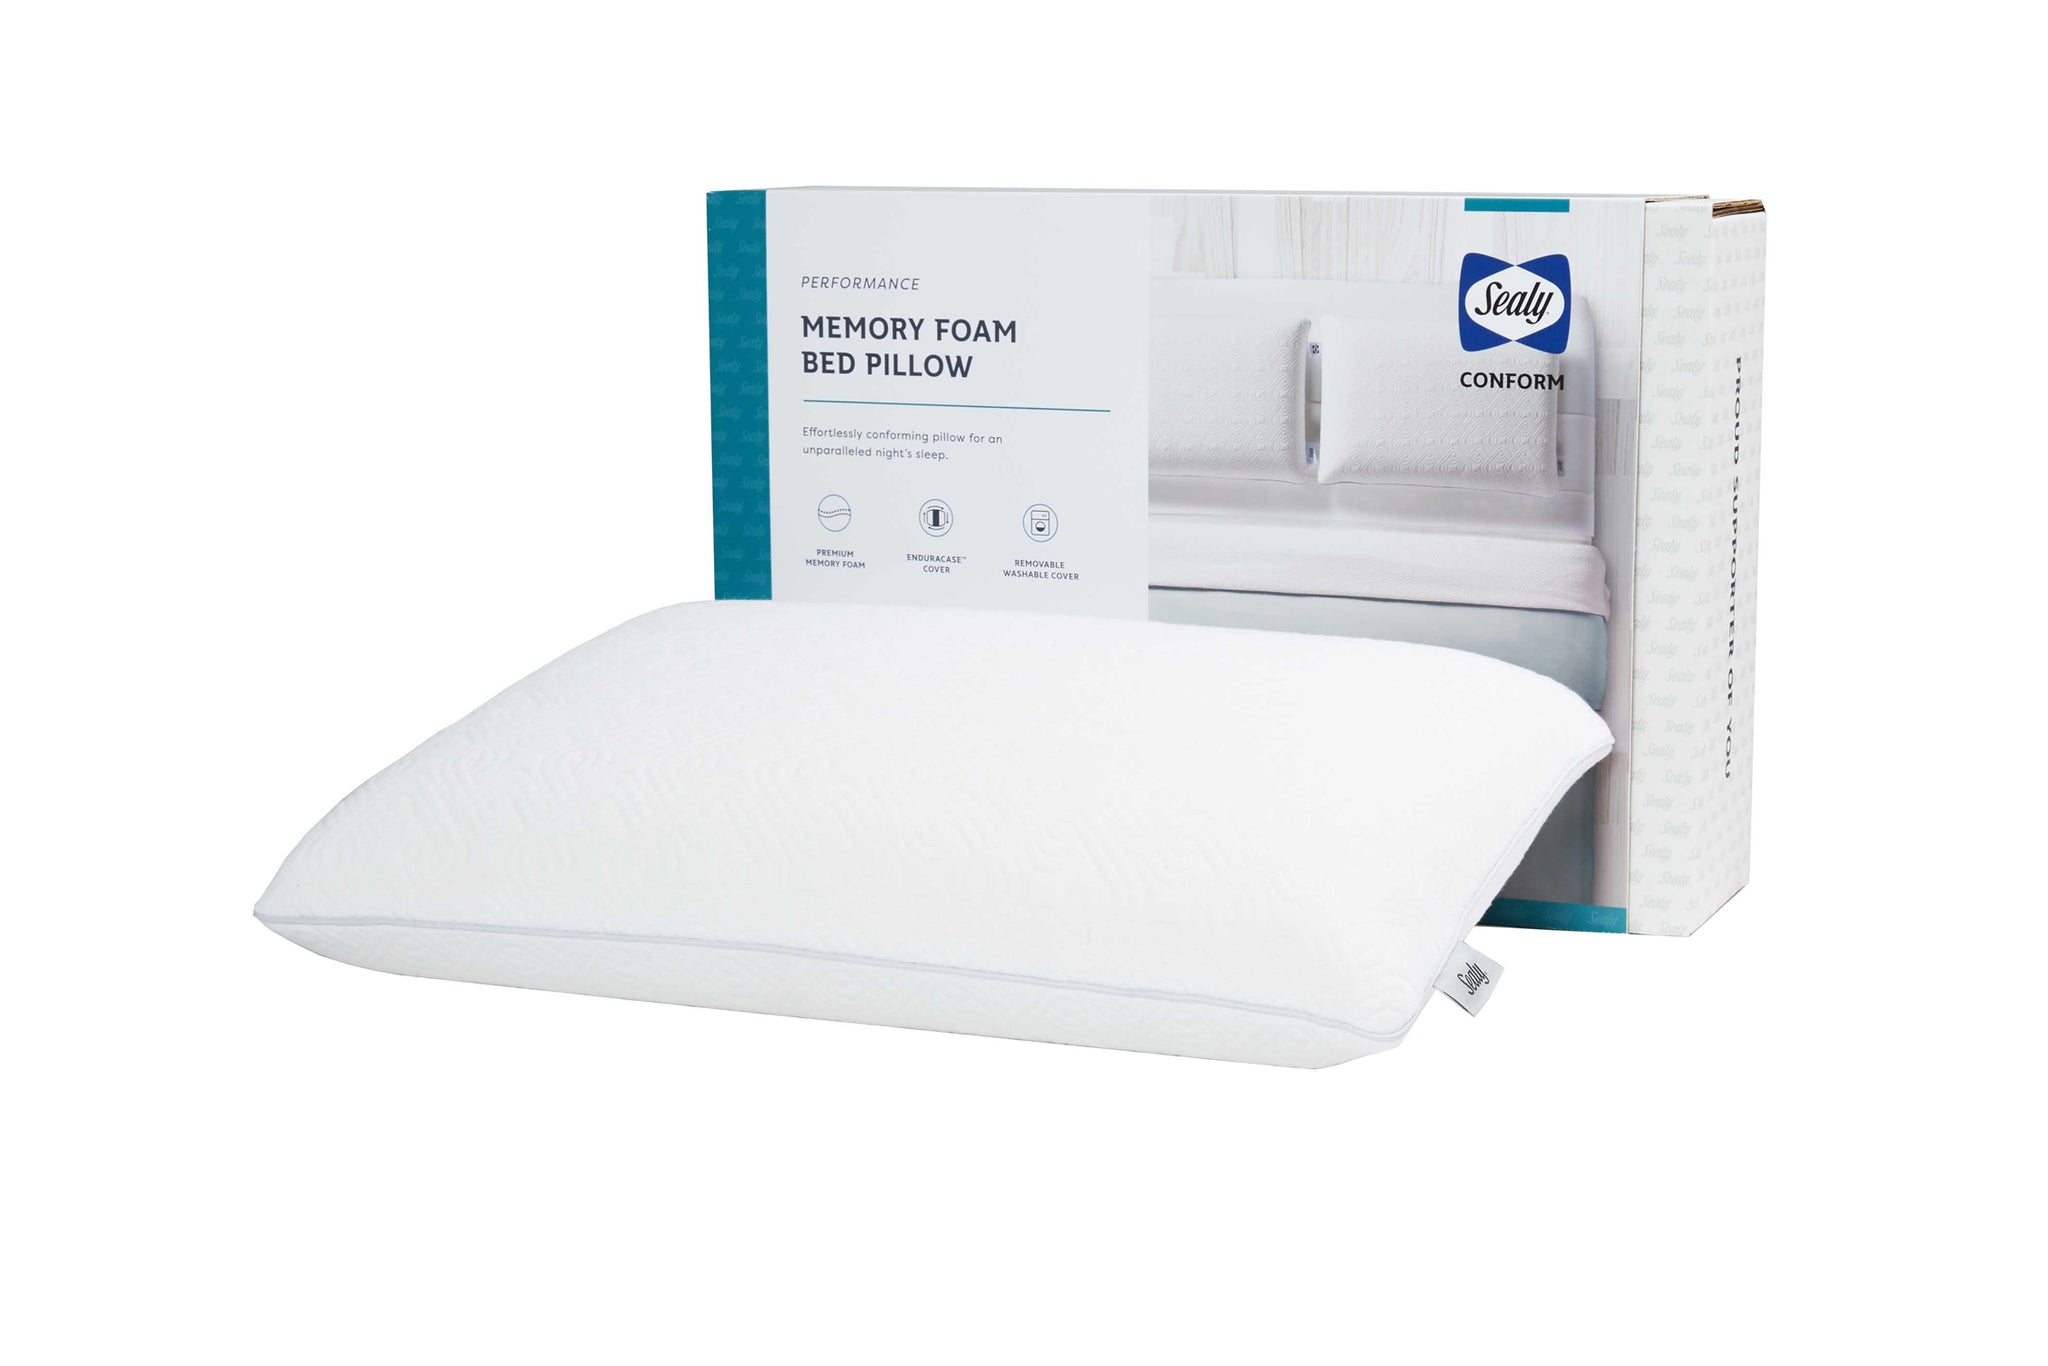 Sealy® Conform Memory Foam Bed Pillow – Sleep Center Direct